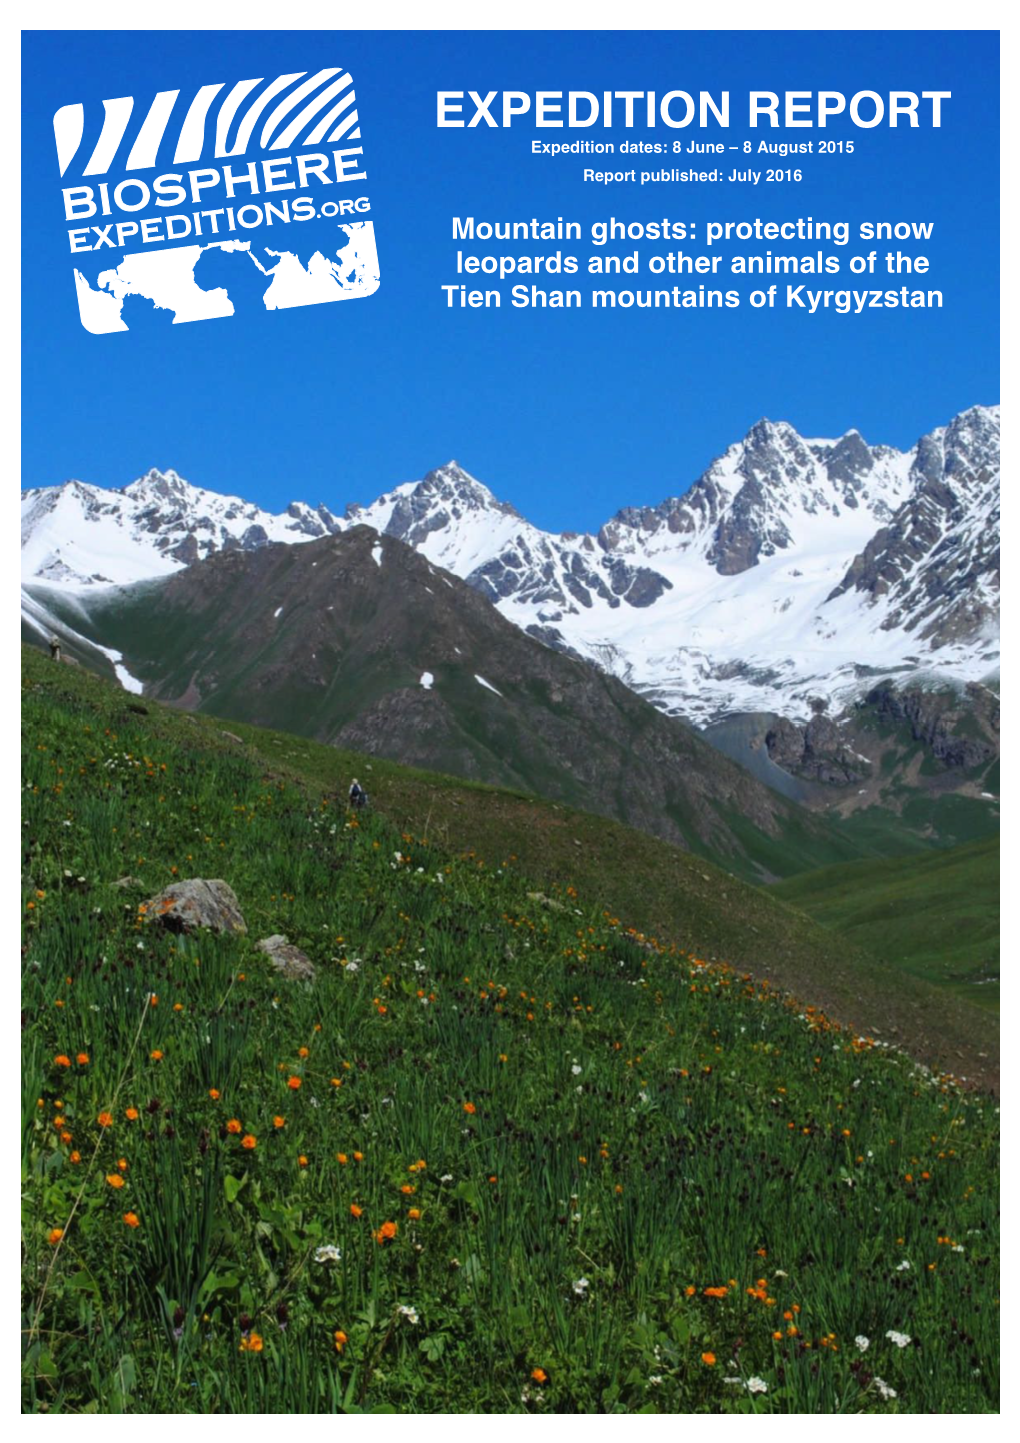 Protecting Snow Leopards and Other Animals of the Tien Shan Mountains of Kyrgyzstan